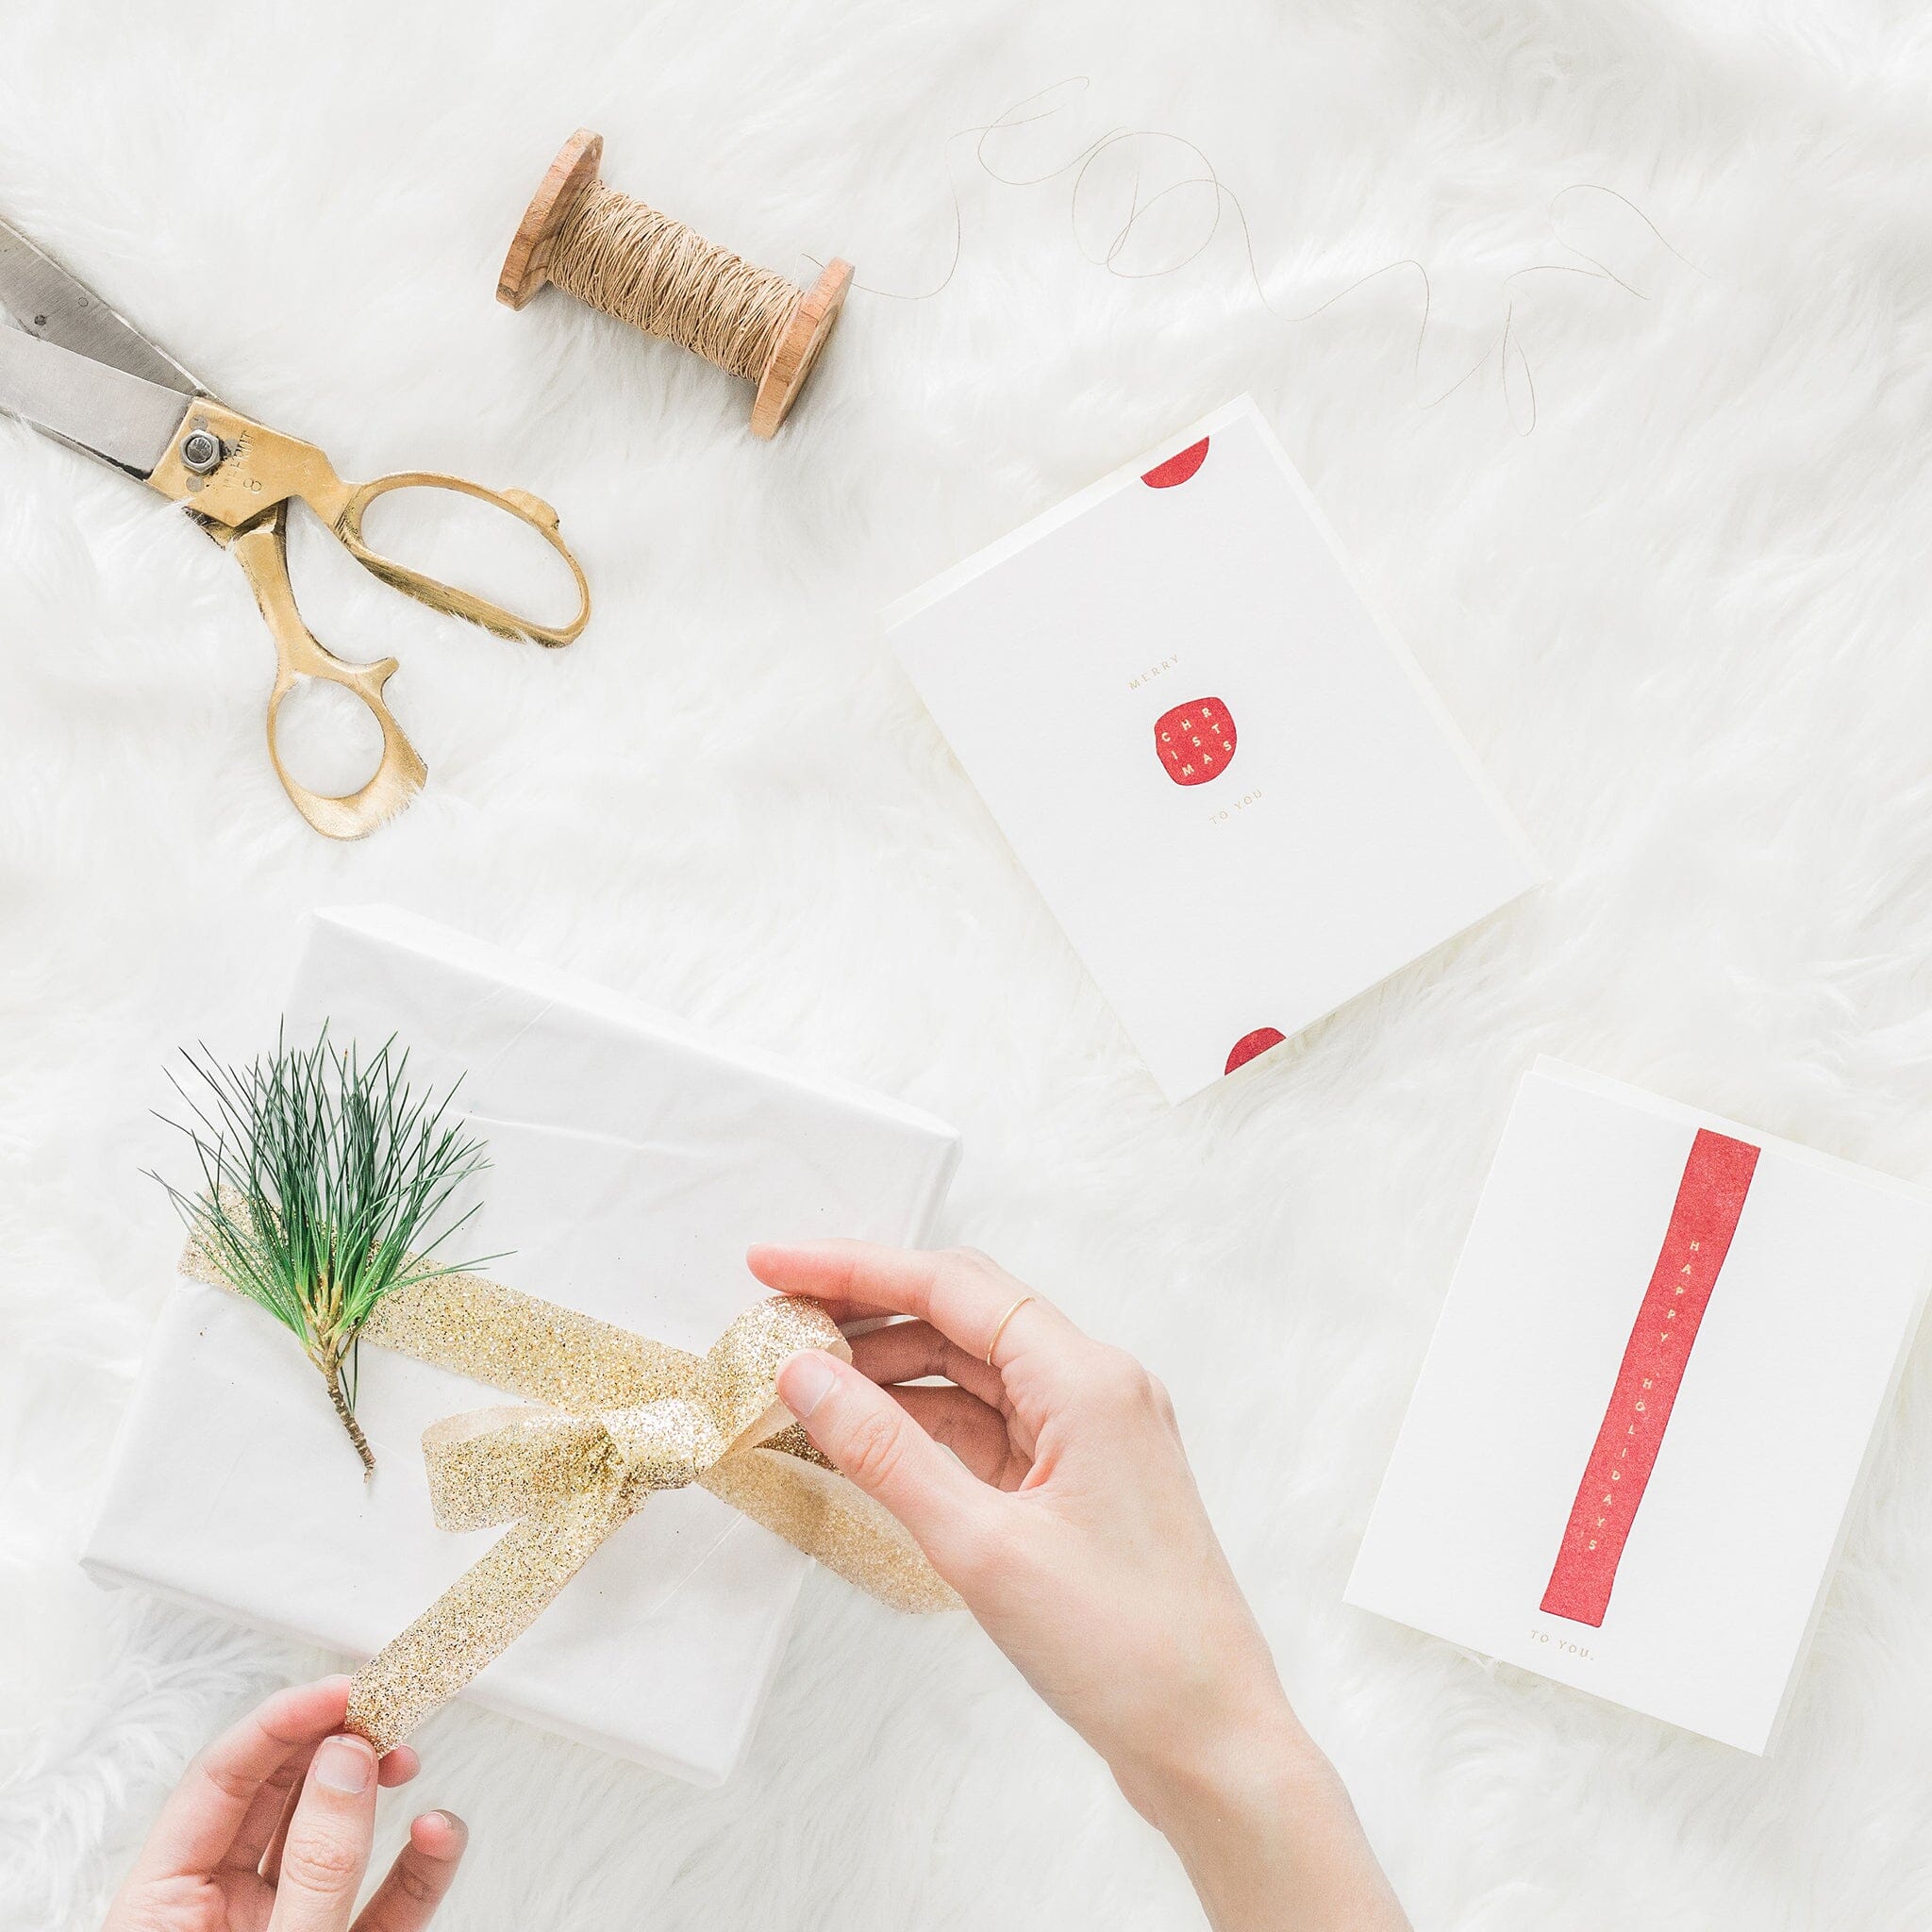 5 Easy Ways to Add a Special Touch to Gift Packaging